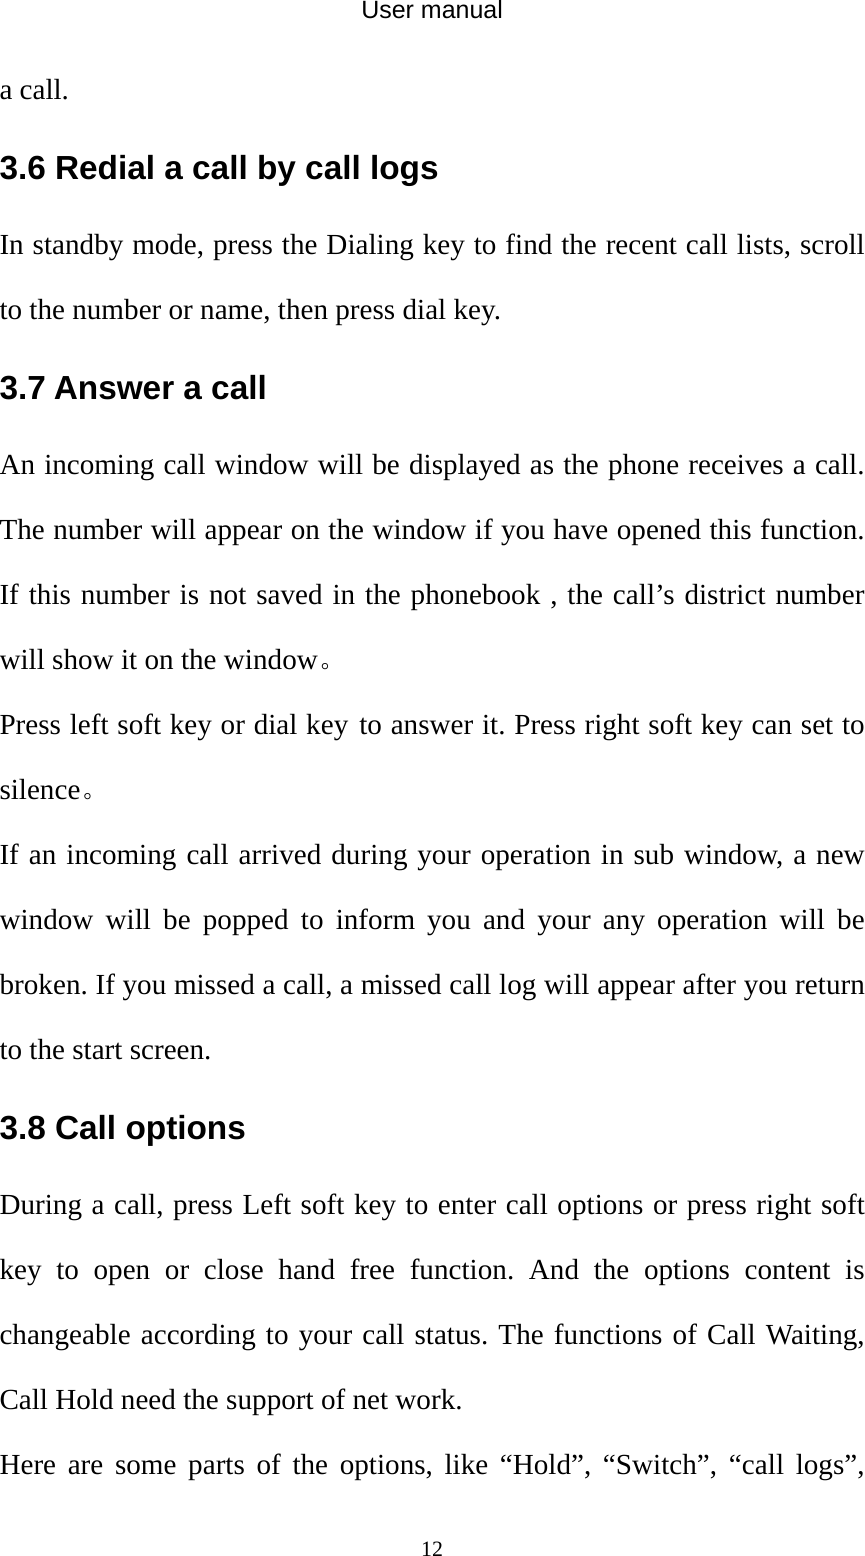 User manual  12a call. 3.6 Redial a call by call logs In standby mode, press the Dialing key to find the recent call lists, scroll to the number or name, then press dial key. 3.7 Answer a call An incoming call window will be displayed as the phone receives a call. The number will appear on the window if you have opened this function. If this number is not saved in the phonebook , the call’s district number will show it on the window。 Press left soft key or dial key to answer it. Press right soft key can set to silence。 If an incoming call arrived during your operation in sub window, a new window will be popped to inform you and your any operation will be broken. If you missed a call, a missed call log will appear after you return to the start screen. 3.8 Call options During a call, press Left soft key to enter call options or press right soft key to open or close hand free function. And the options content is changeable according to your call status. The functions of Call Waiting, Call Hold need the support of net work. Here are some parts of the options, like “Hold”, “Switch”, “call logs”, 